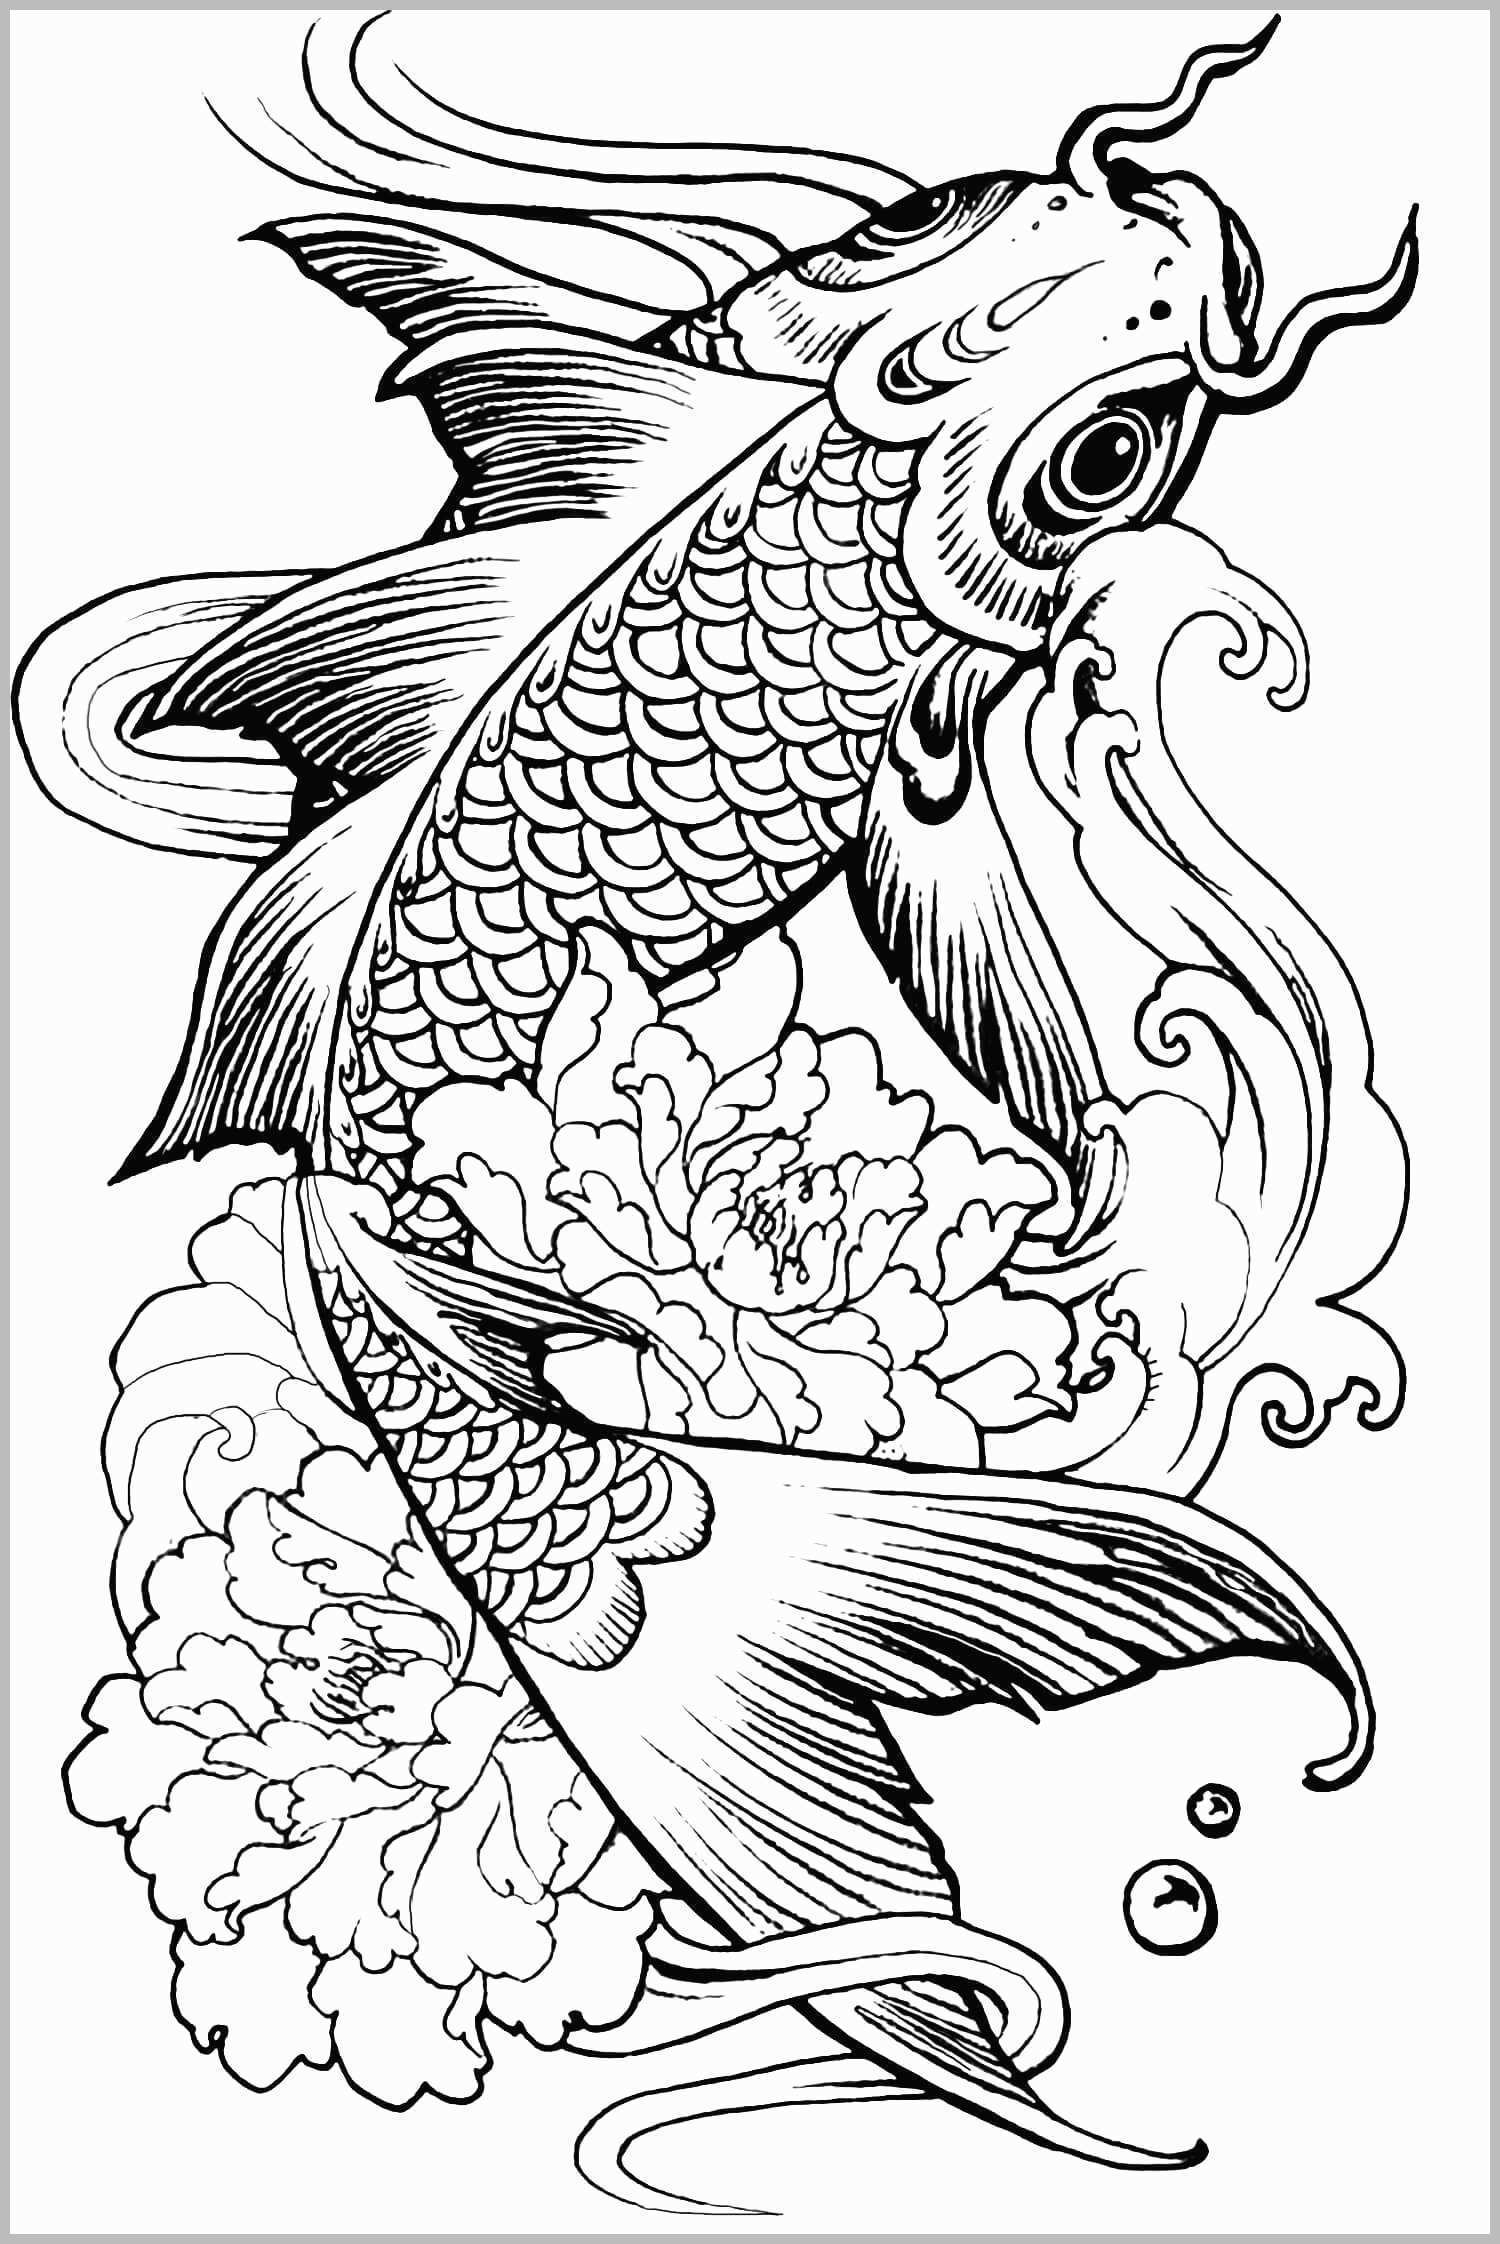 Coloring Pages Of Animals Hard Images Of Intricate Coloring Pages Animals Sabadaphnecottage